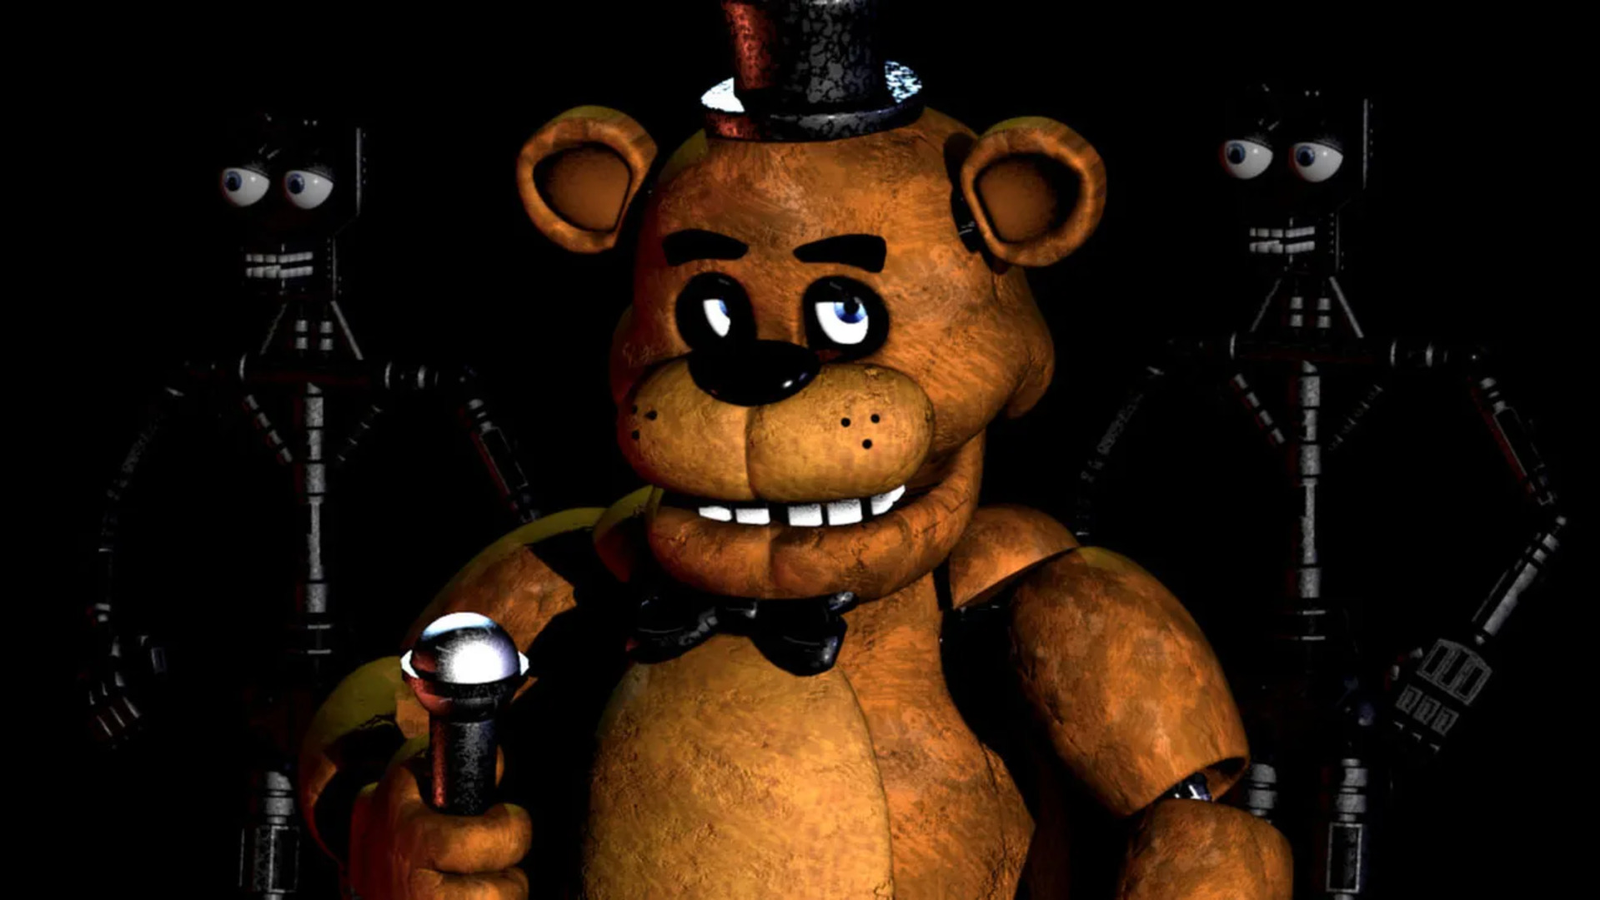 William Afton/Springtrap Fan Casting for Five Nights At Freddy's 2 Movie